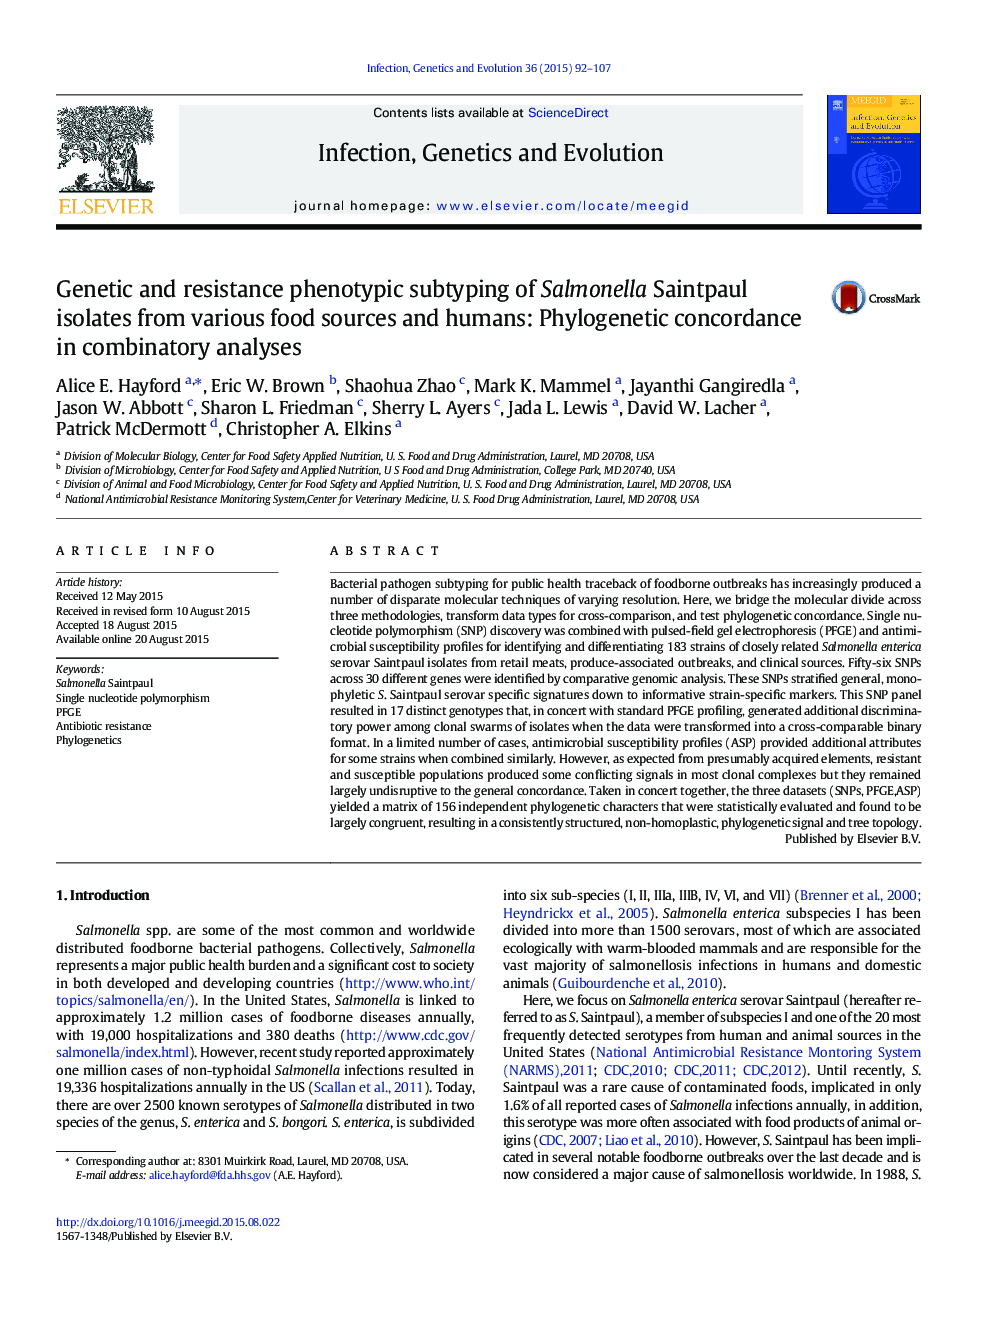 Genetic and resistance phenotypic subtyping of Salmonella Saintpaul isolates from various food sources and humans: Phylogenetic concordance in combinatory analyses